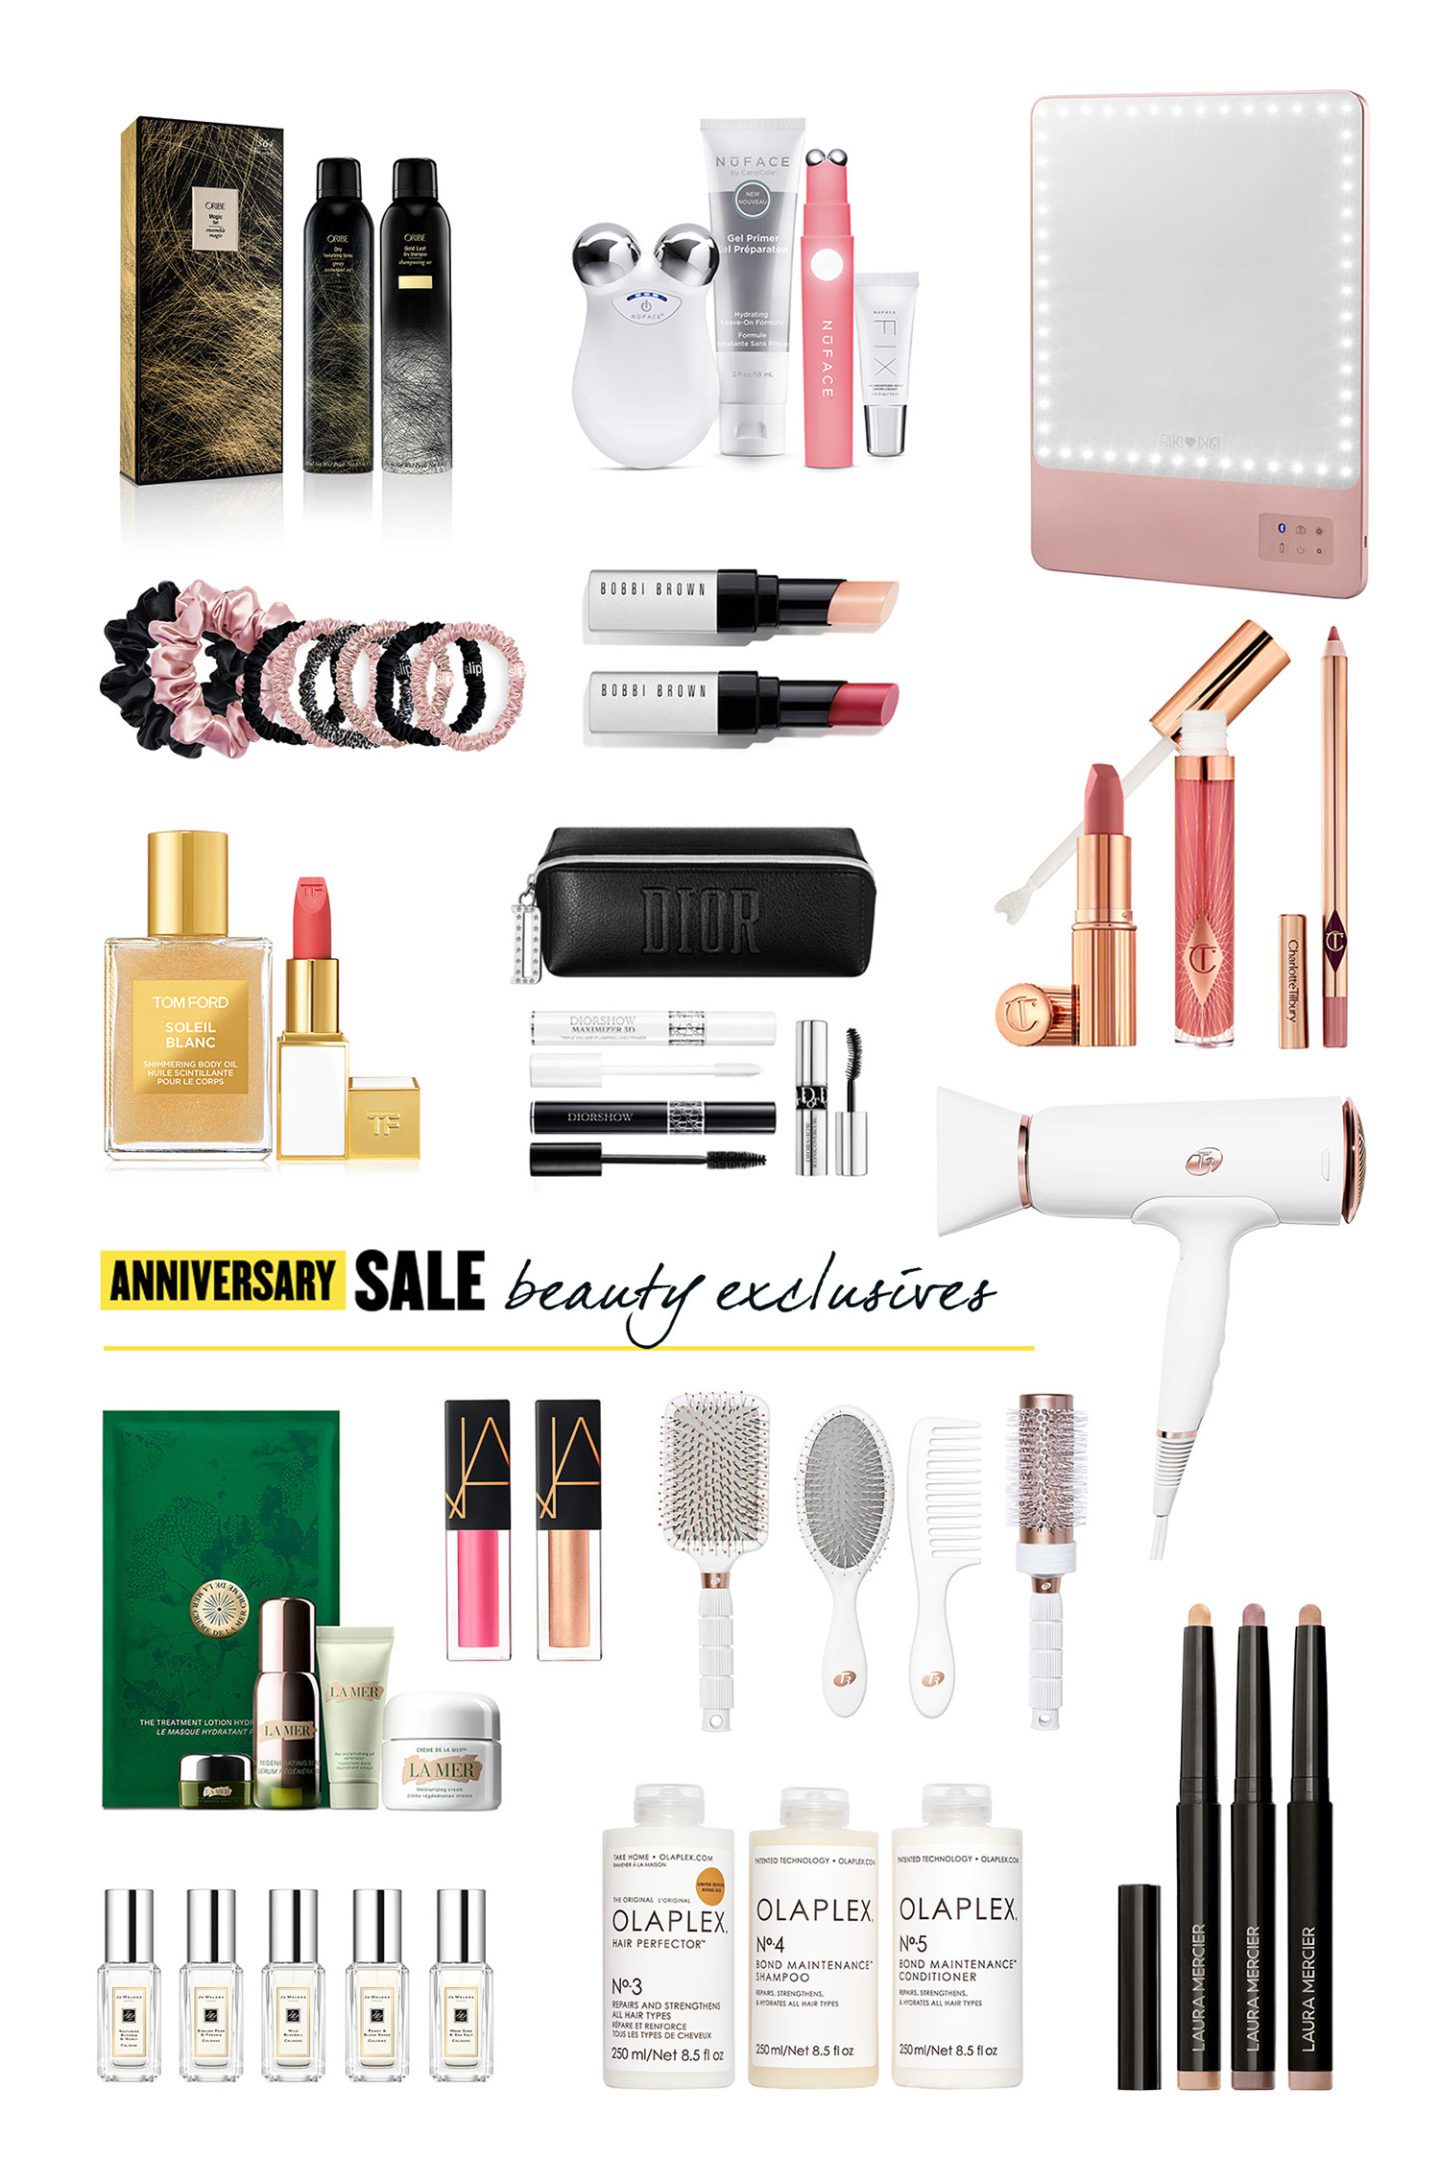 Nordstrom Anniversary Sale Beauty Exclusives 2020 | The Beauty Look Book